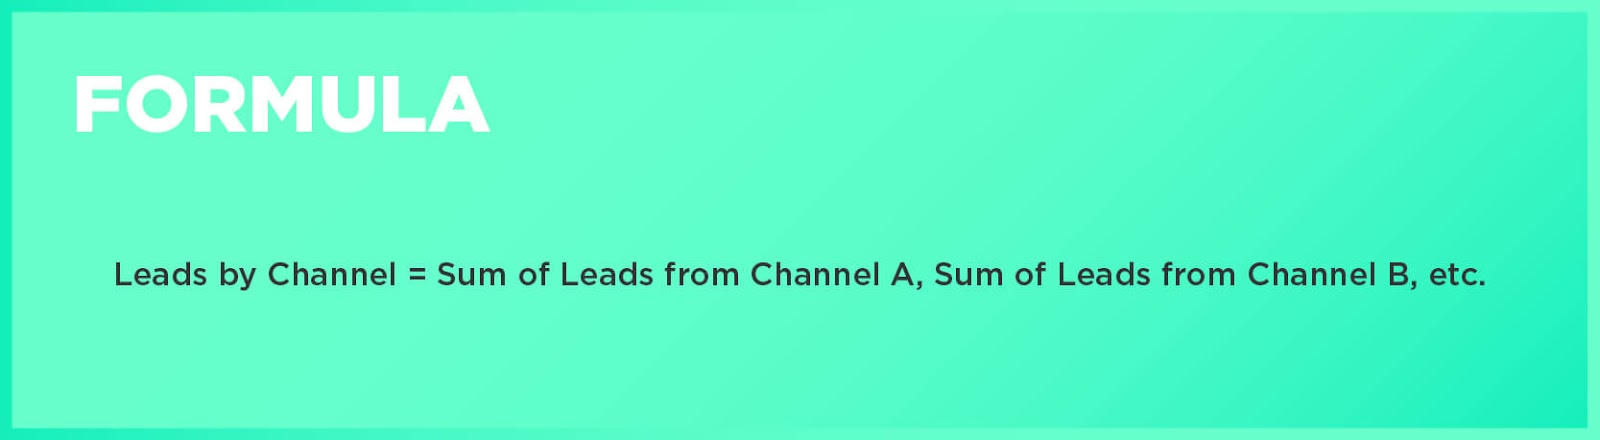 Leads by Channel Formula: Leads by Channel = Sum of Leads from Channel A, Sum of Leads from Channel B, etc. 